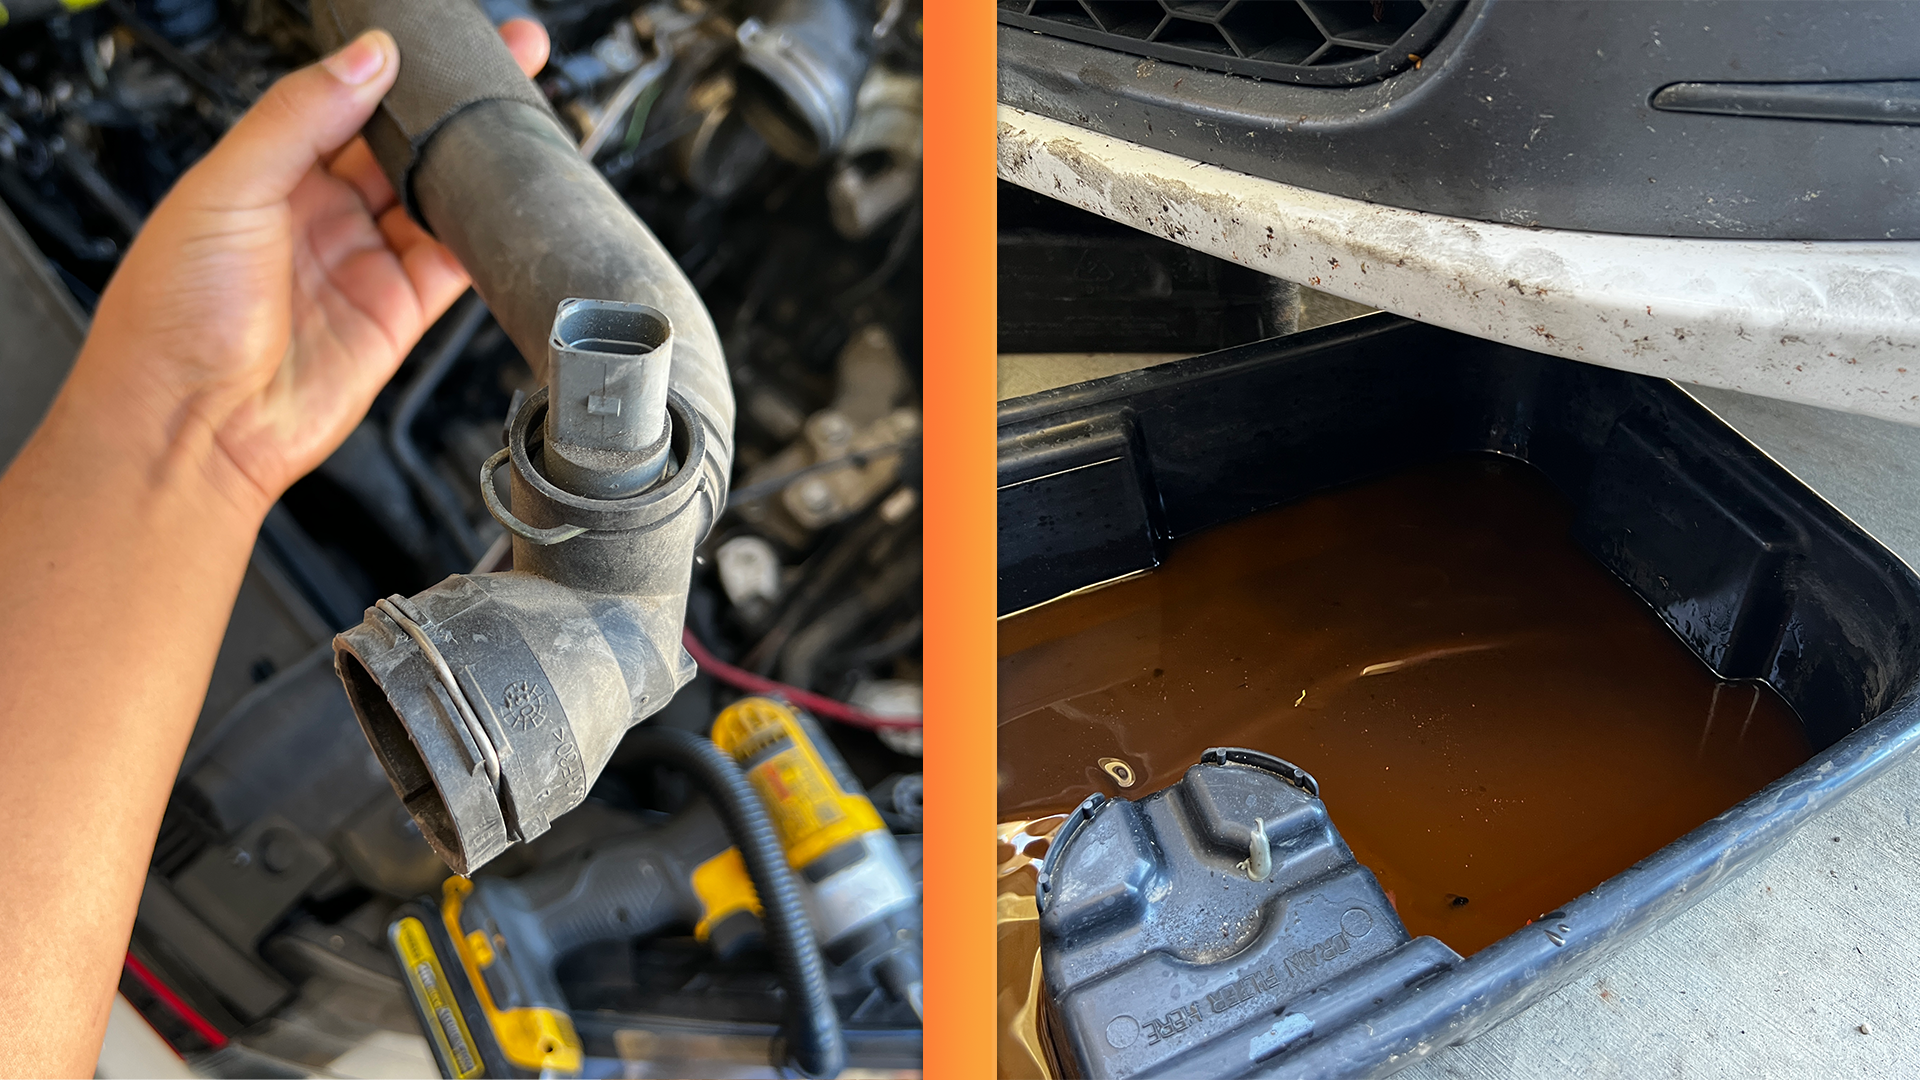 A split image of a lower radiator hose with a coolant temperature sensor, and a drain pain full of pink coolant.